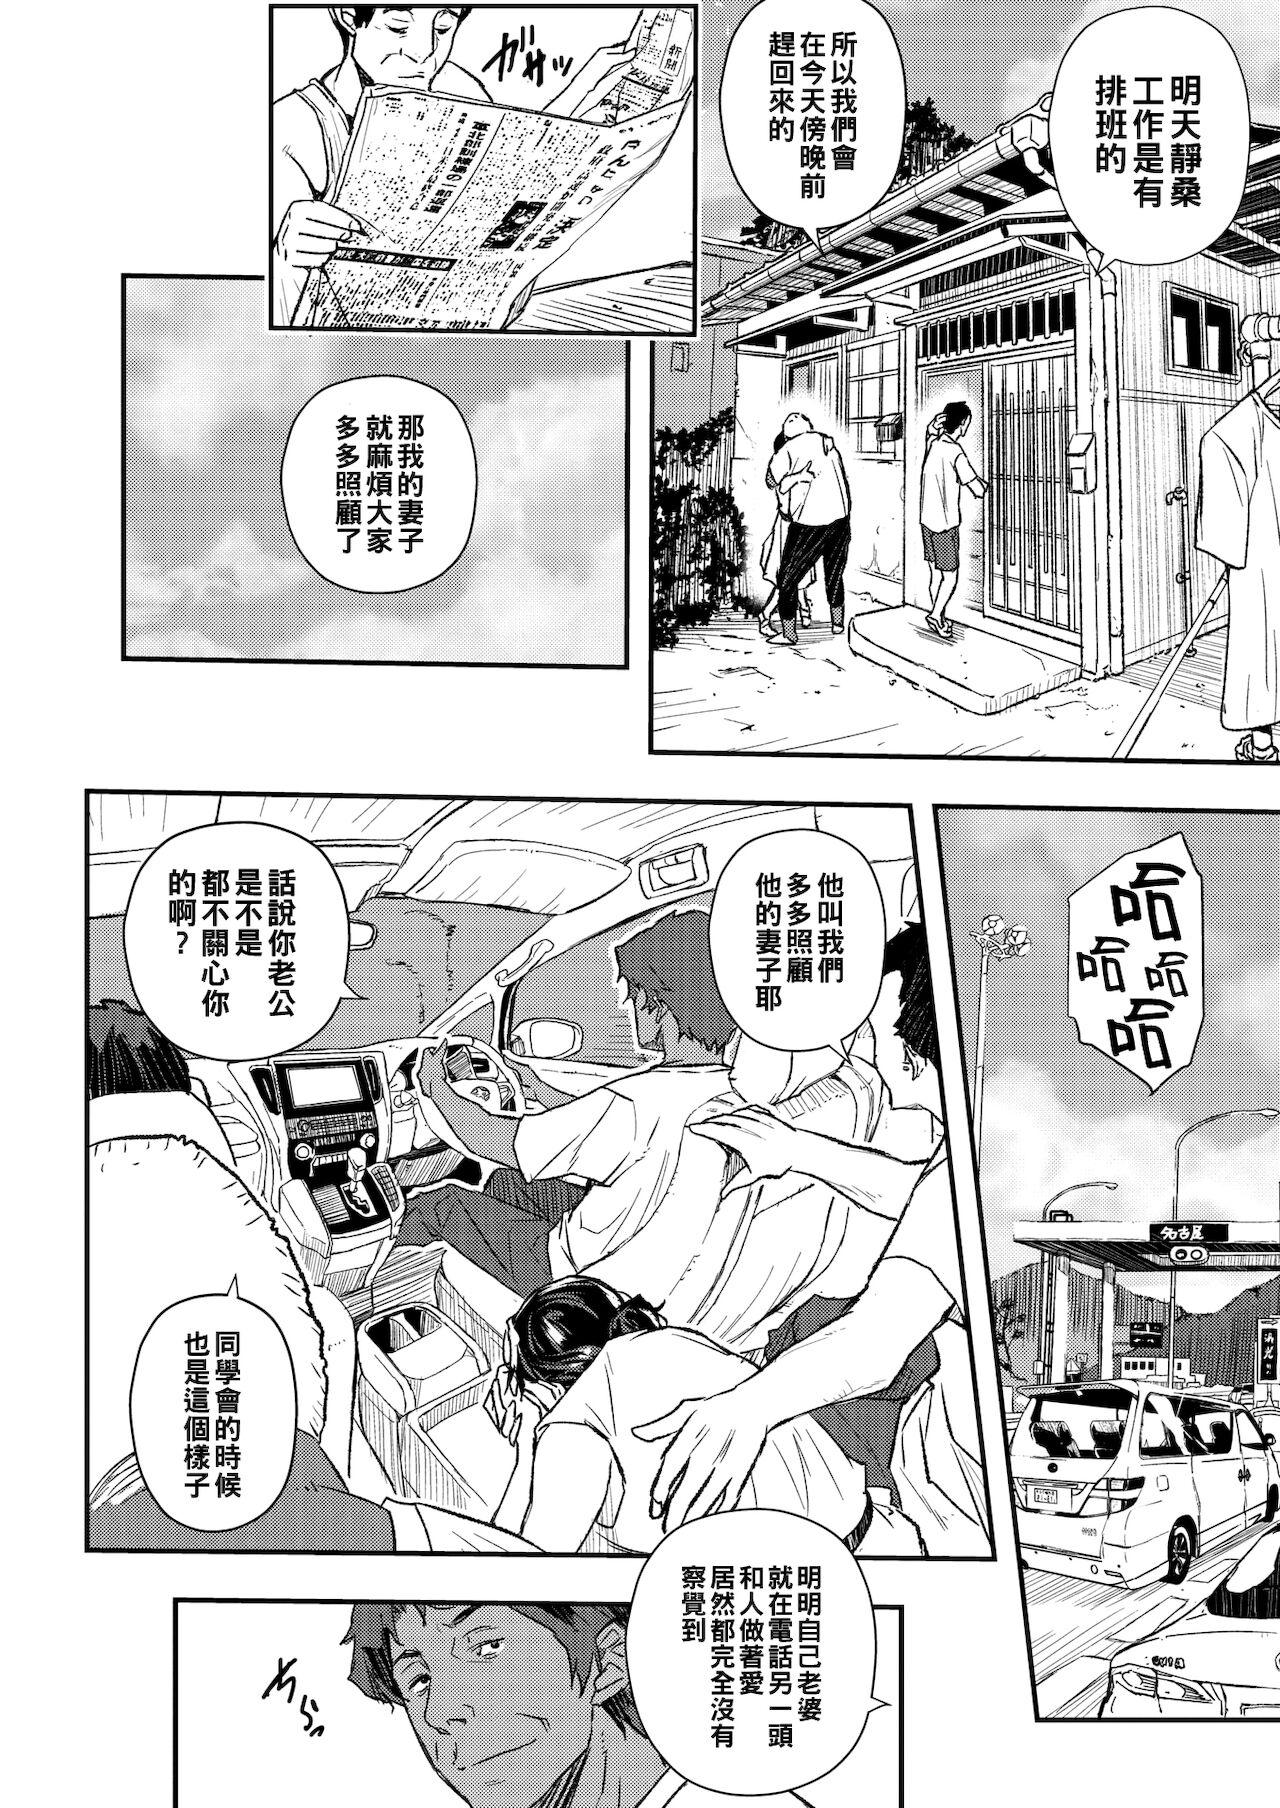 Cuck 続満点のカラダ（Chinese） Sexcam - Page 4